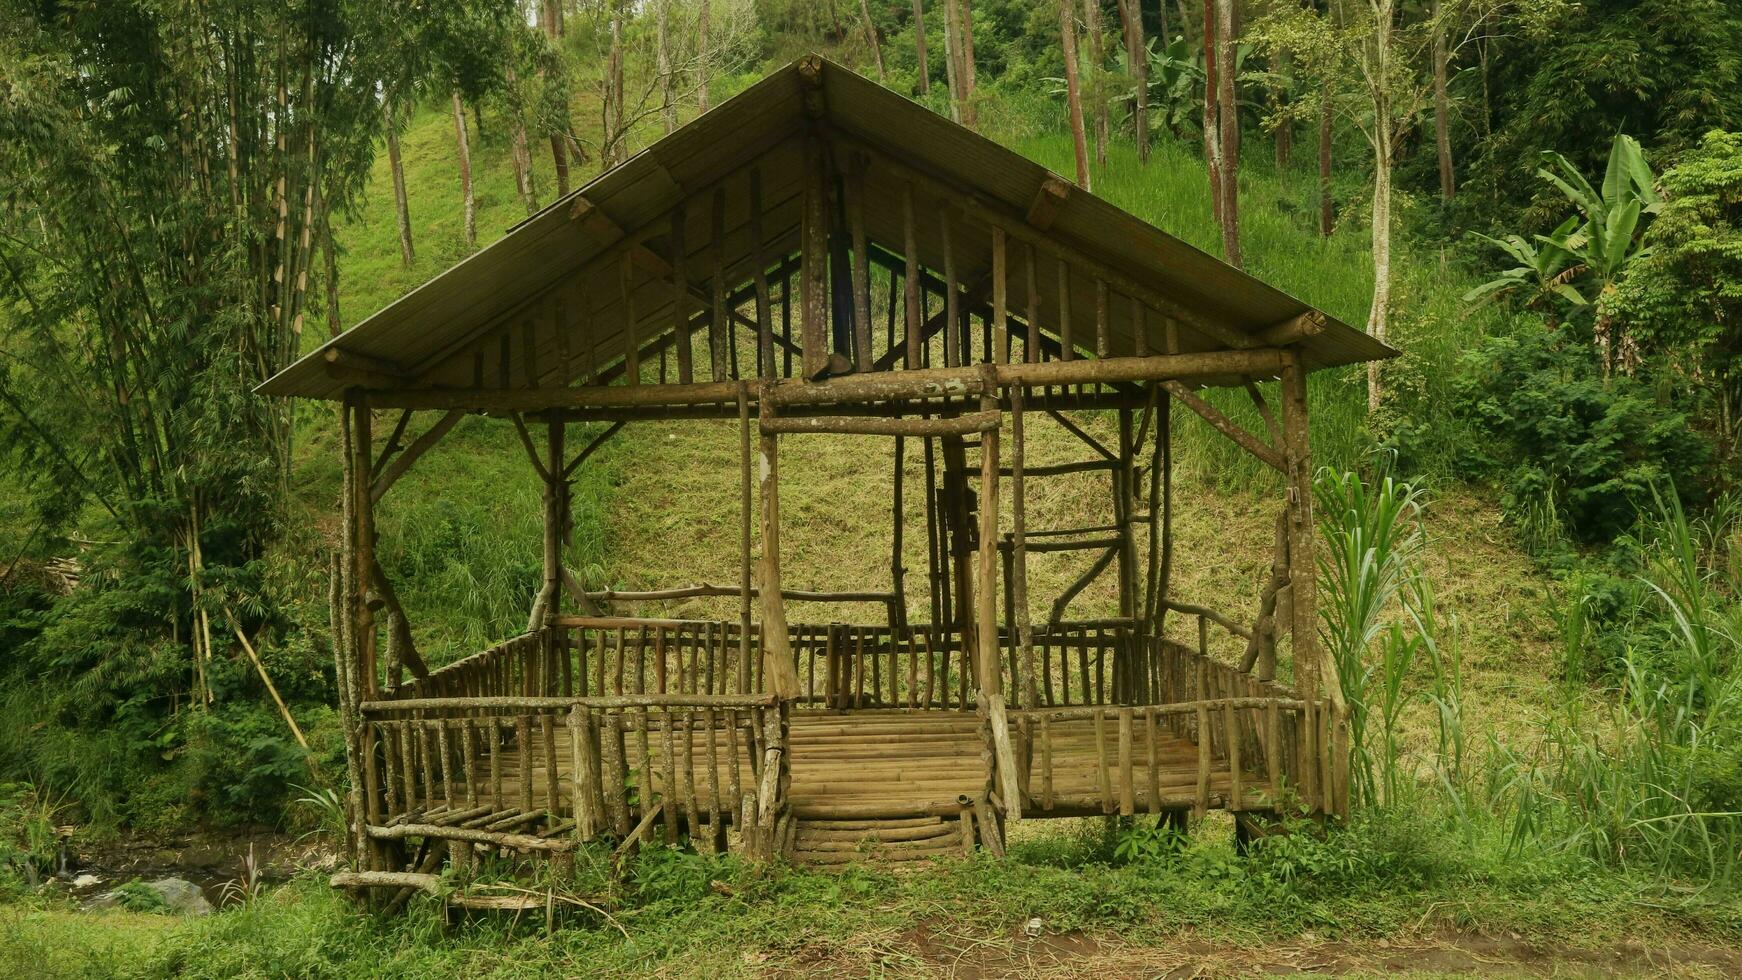 Gubuk kayu, a shab, vintage wooden house located in the forest photo